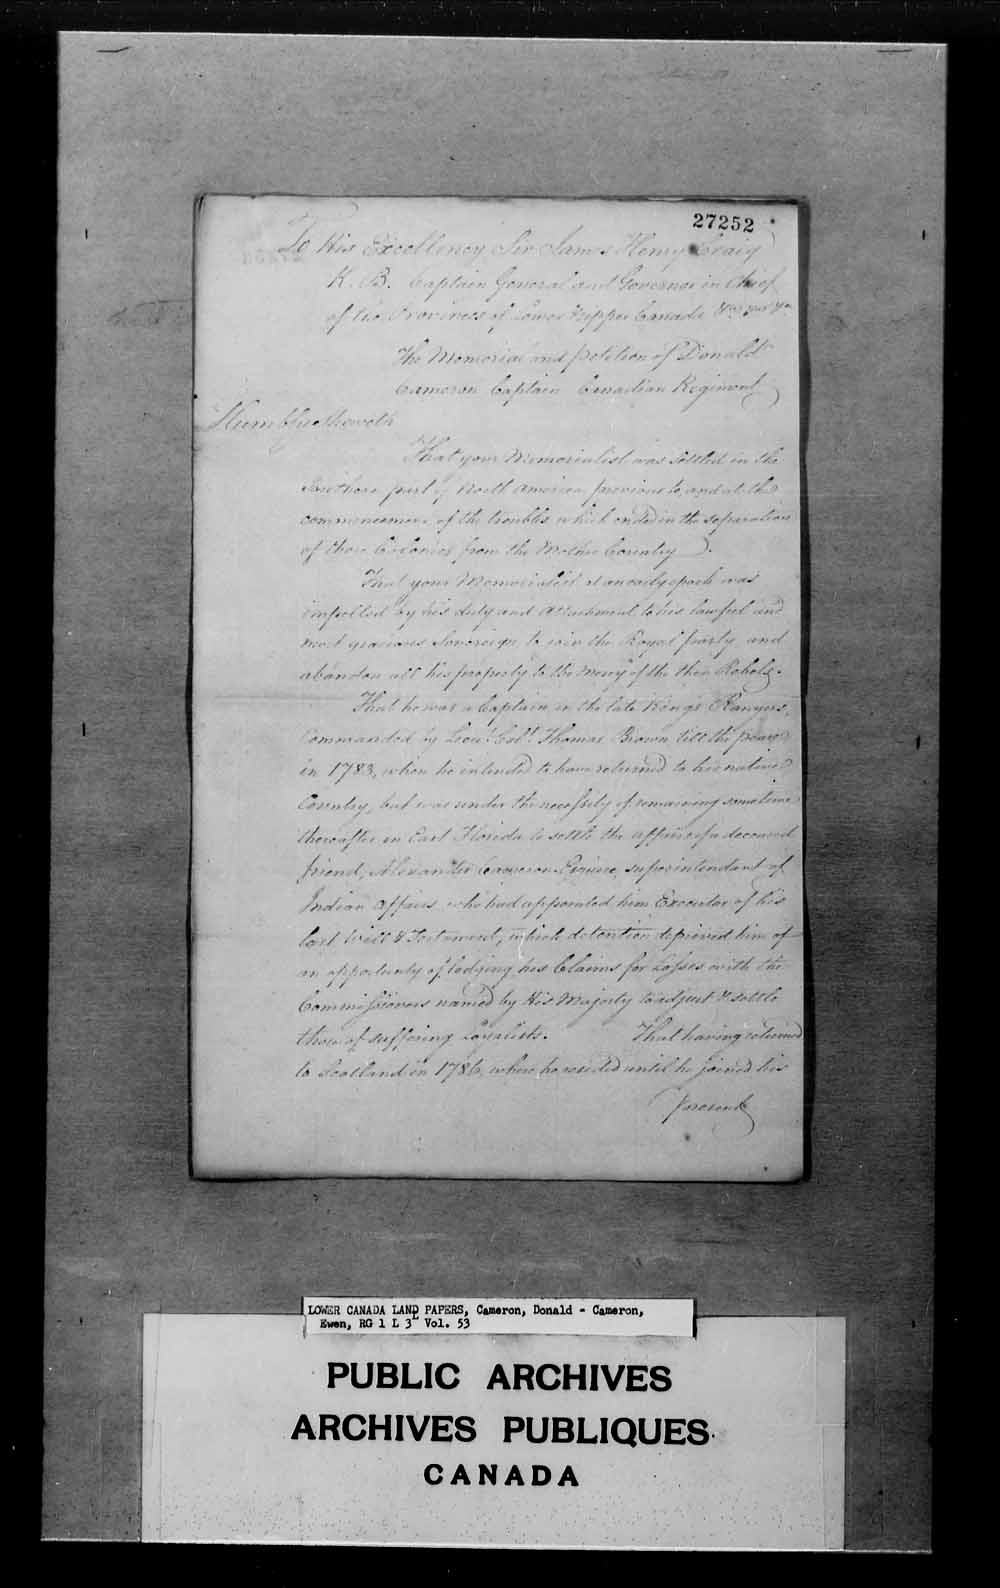 Digitized page of  for Image No.: e006611632